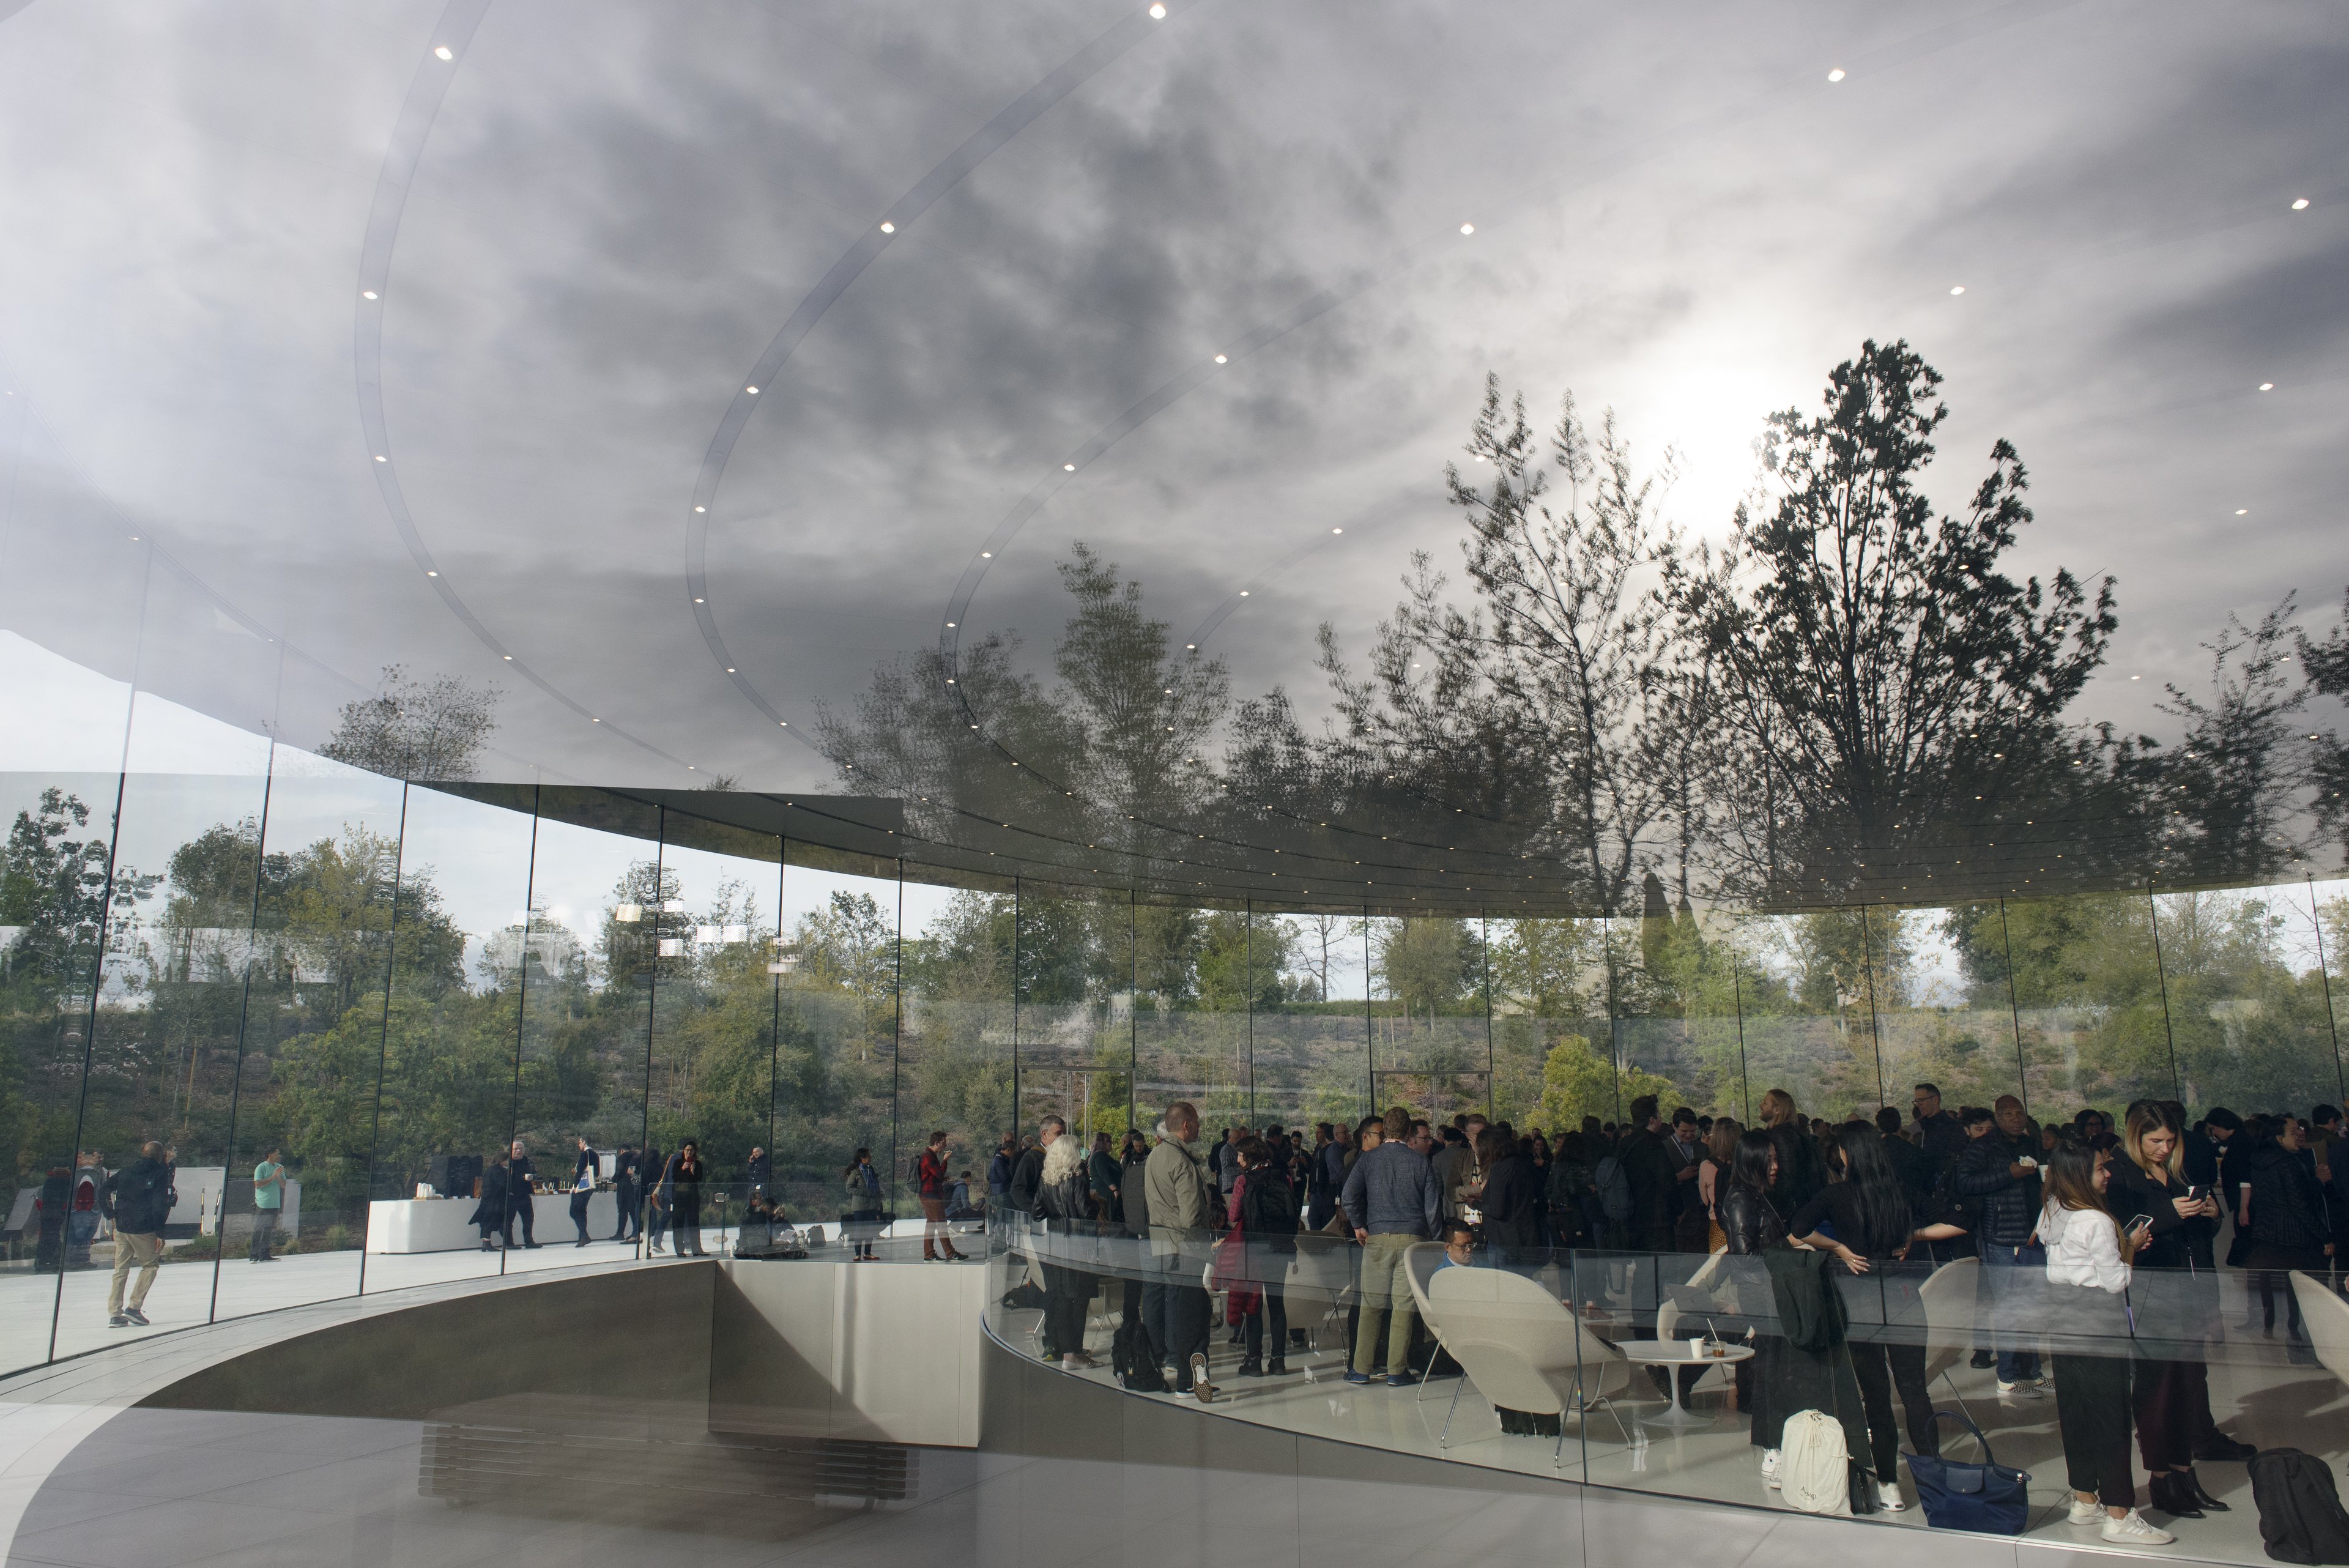 CUPERTINO, CA - MARCH 25: Attendees gather before an Apple product launch event at the Steve Jobs Theater at Apple Park on March 25, 2019 in Cupertino, California. Apple Inc. announced the launch of it's new video streaming service, and unveiled a premium subscription tier to its News app. (Photo by Michael Short/Getty Images)